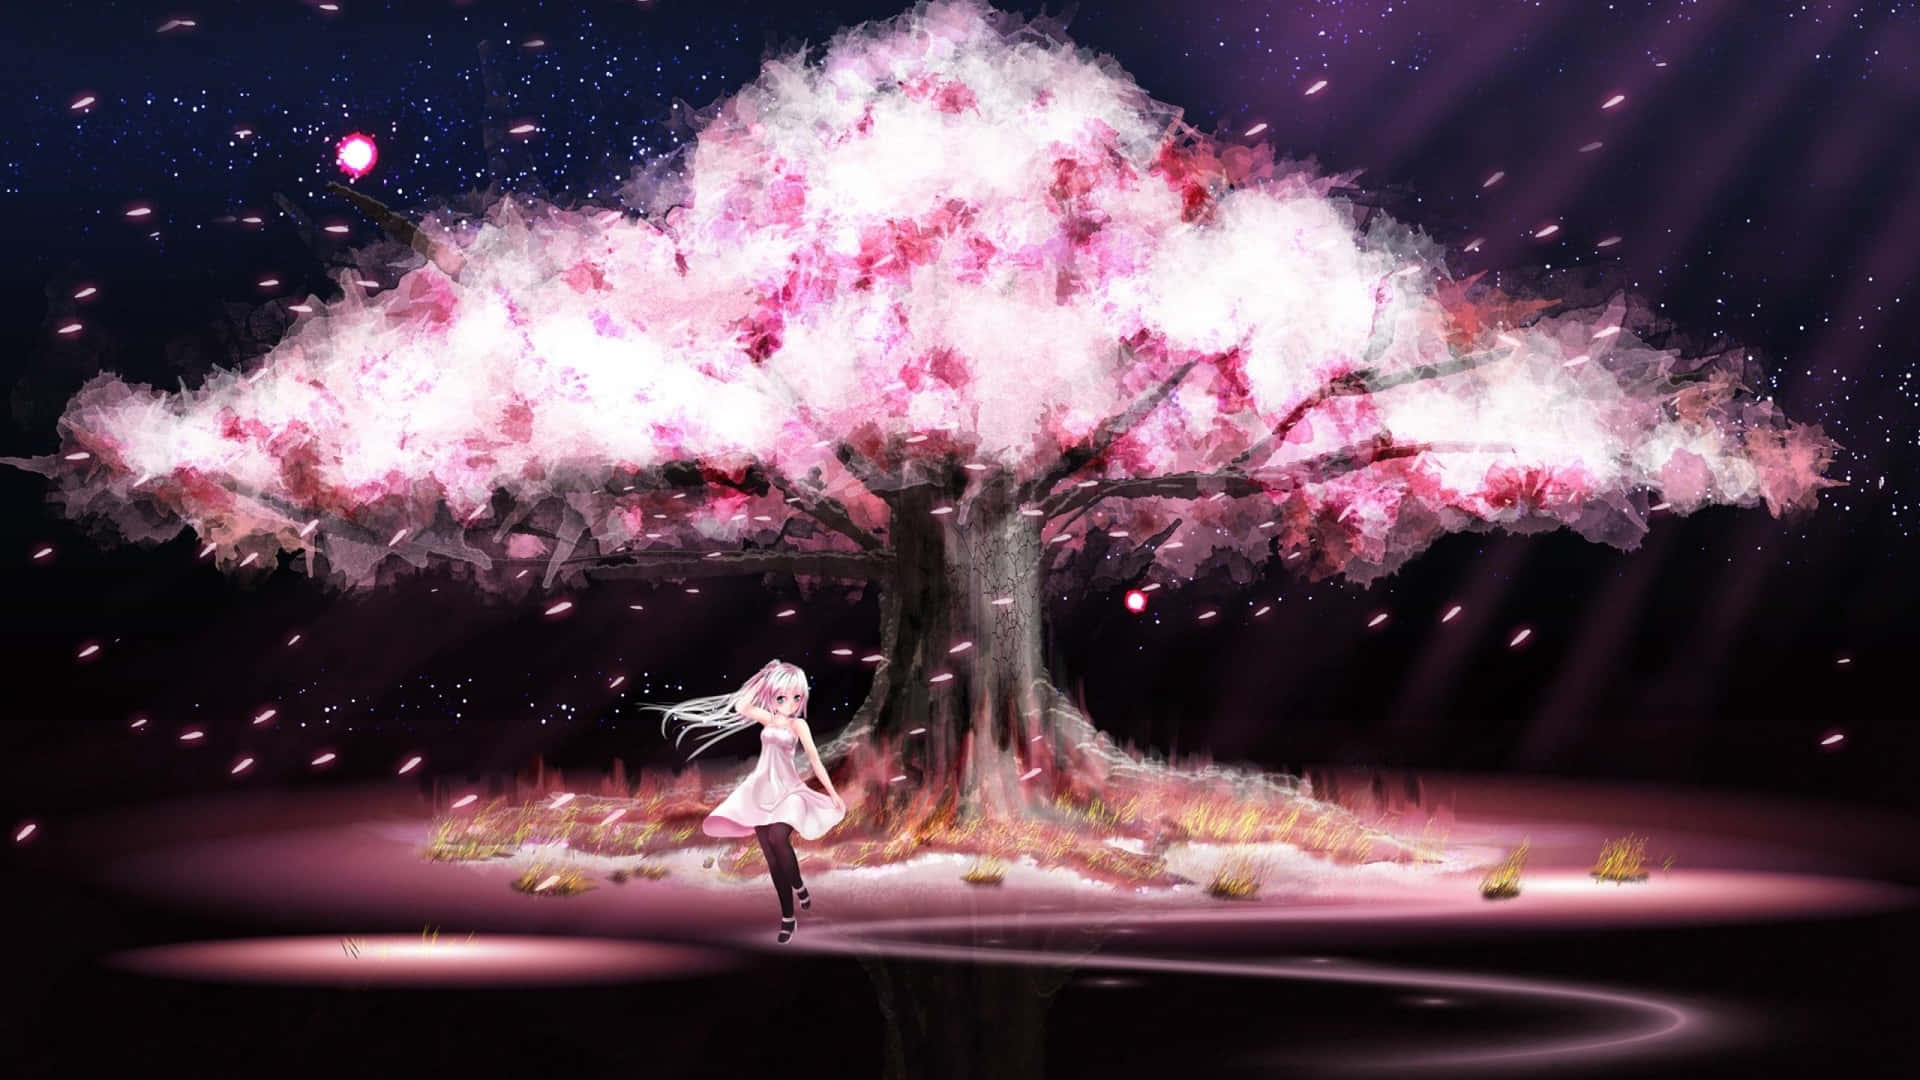 "Sakura Reaching for Stability in a Tempestuous World" Wallpaper